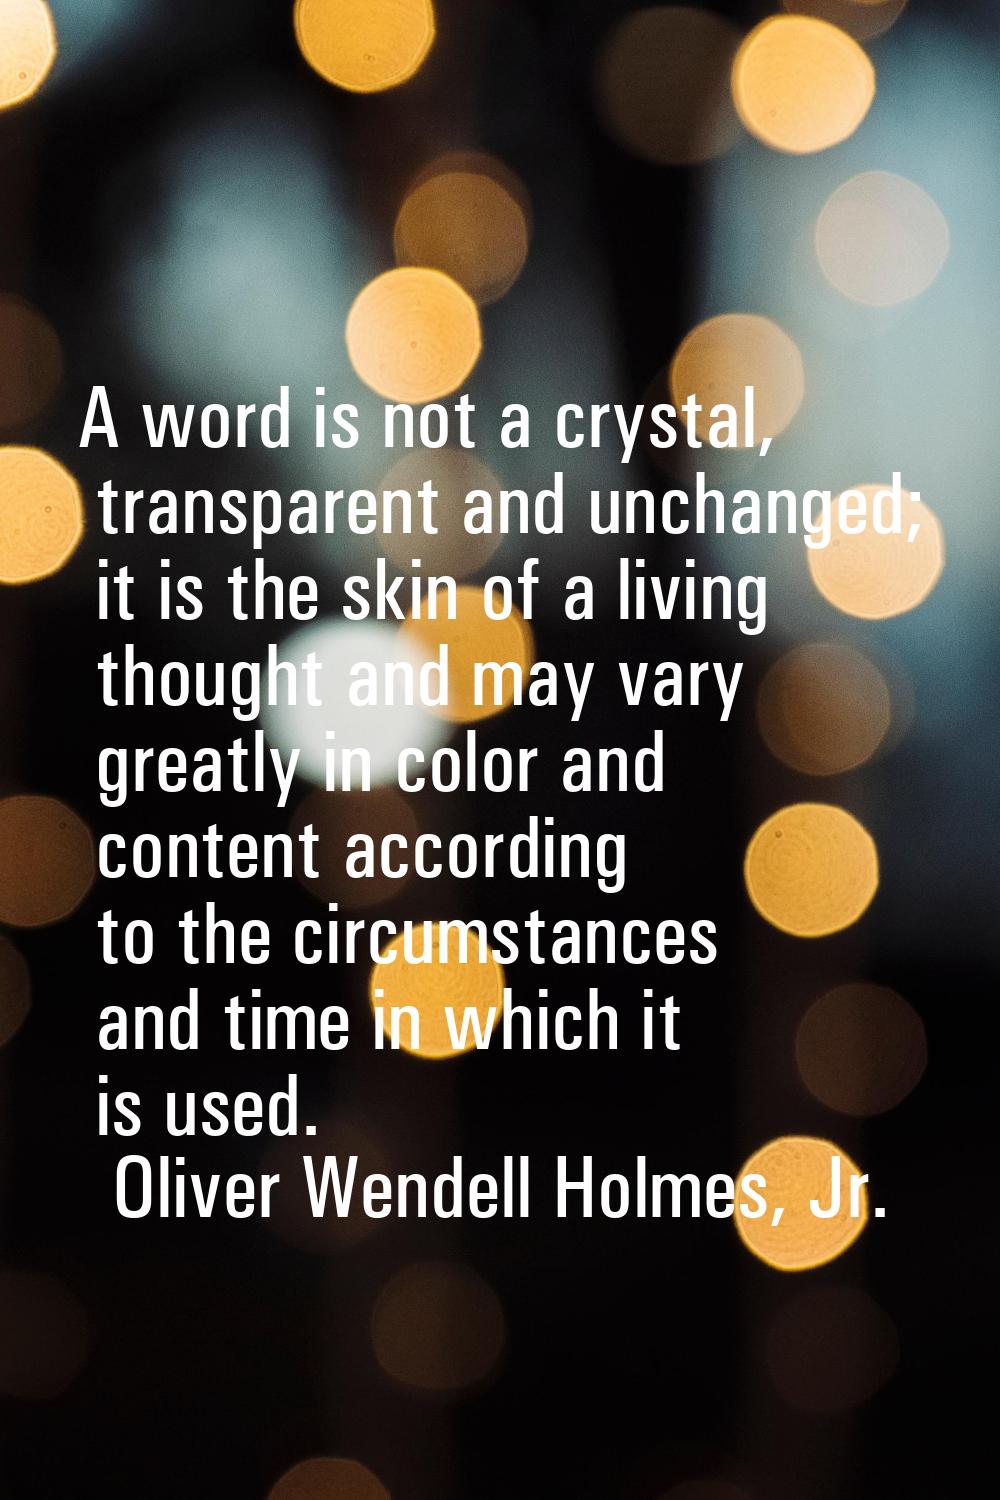 A word is not a crystal, transparent and unchanged; it is the skin of a living thought and may vary